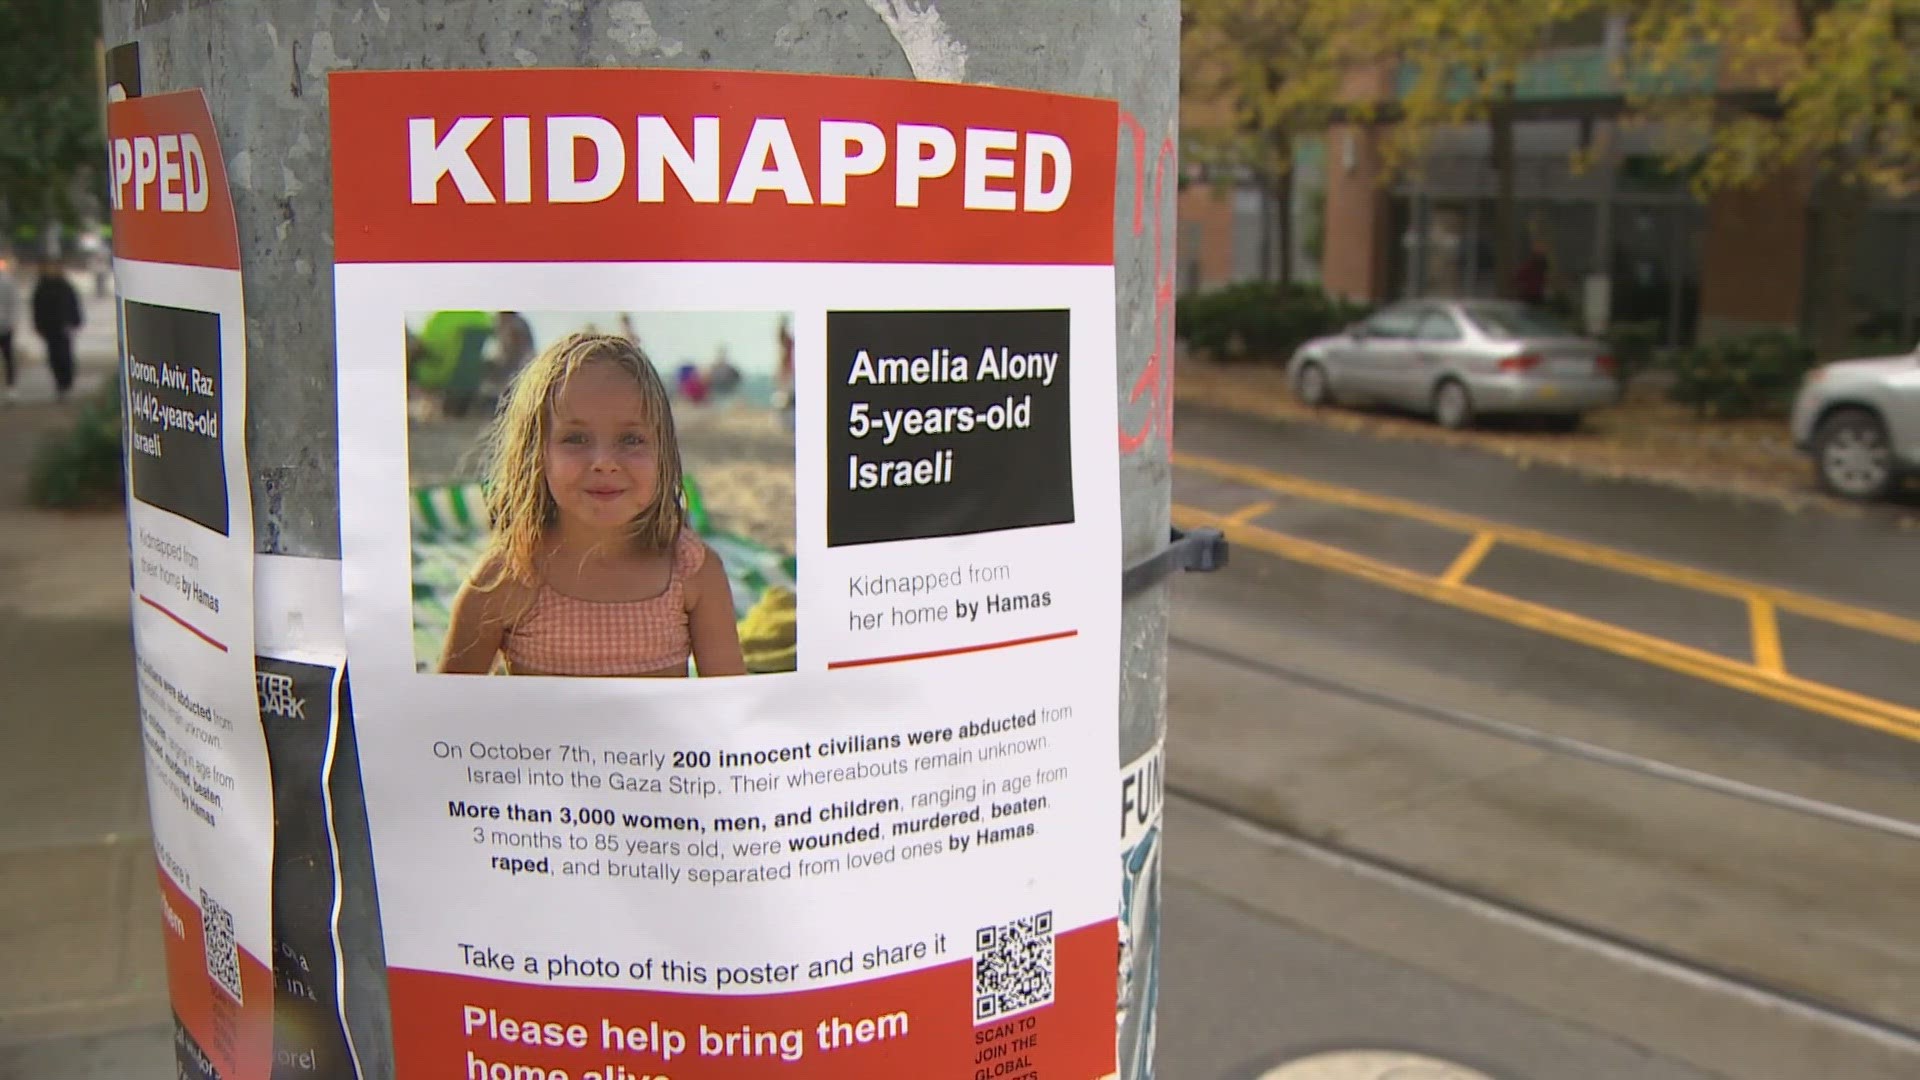 About 200 volunteers have put up thousands of posters across Seattle to spread awareness of the people missing after the Hamas attack.